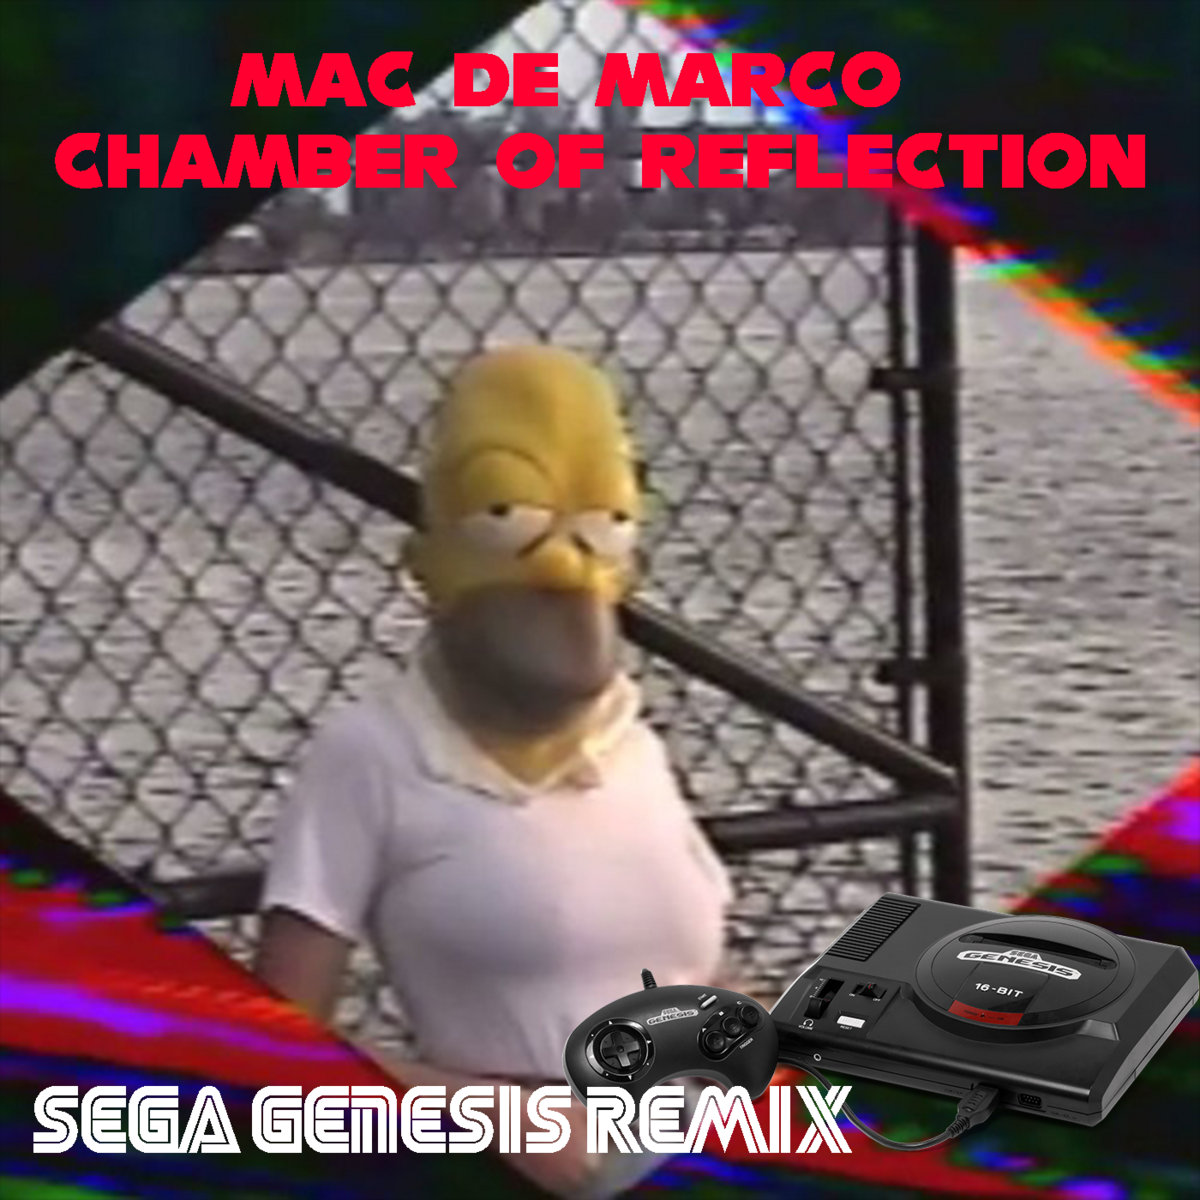 Chamber of reflection mac demarco download free